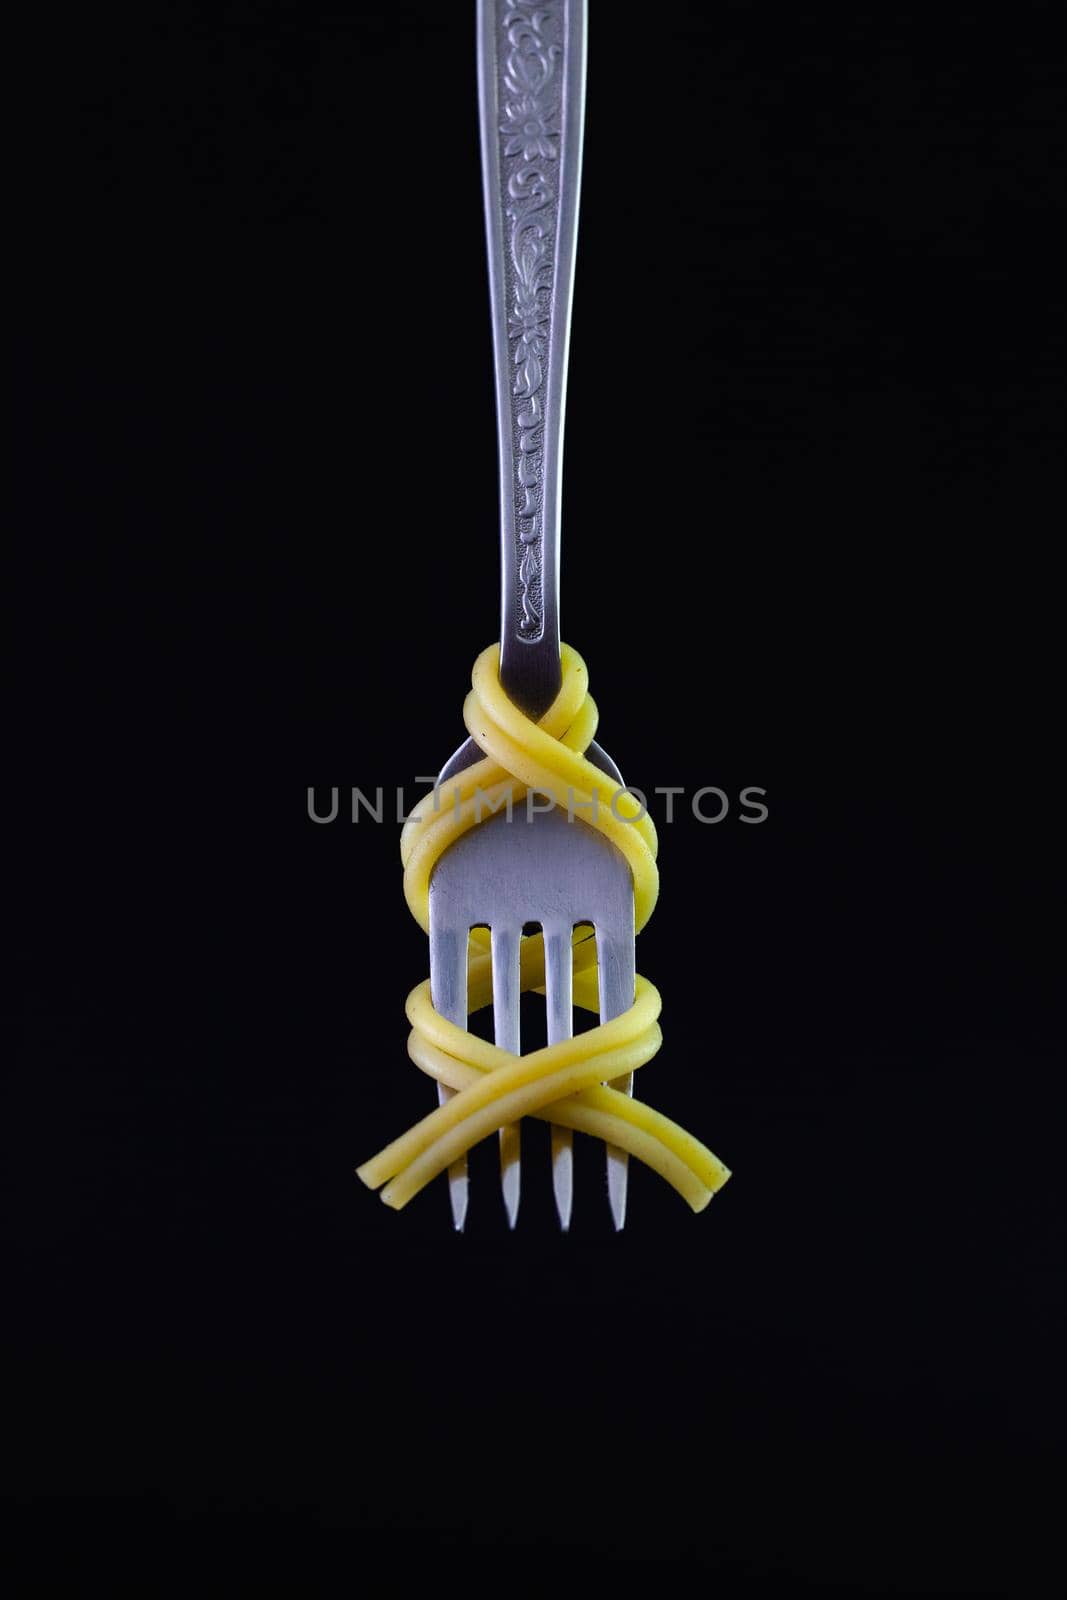 Freshly cooked pasta on a old fork on the black background. Symmetrical loop of spaghetti on an old fork.